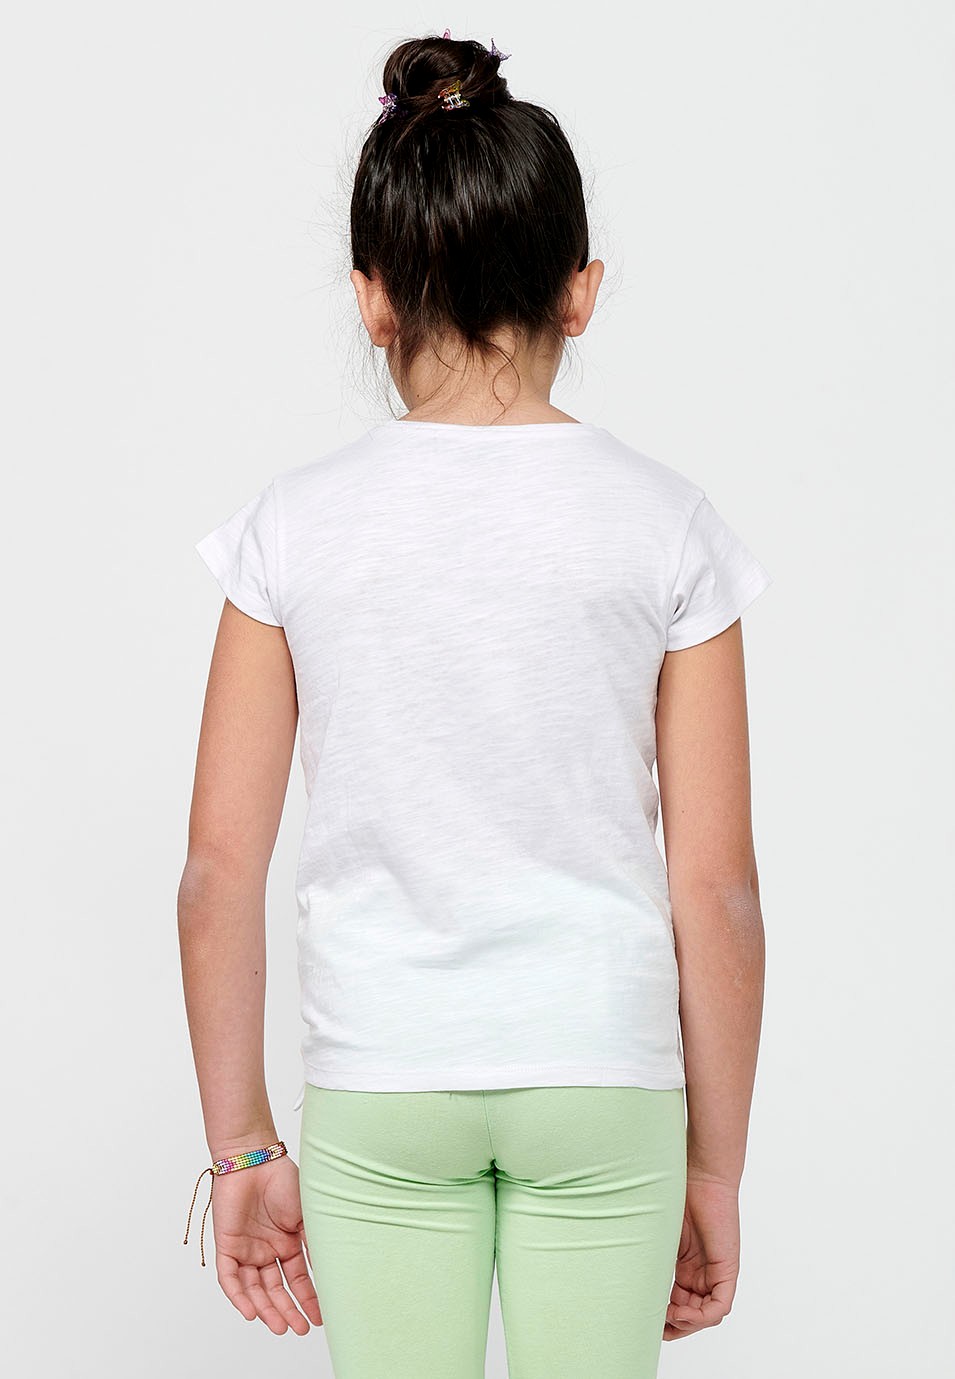 Short-sleeved T-shirt Round Neck Cotton Top with Front Print and White Front Detail for Girls 6